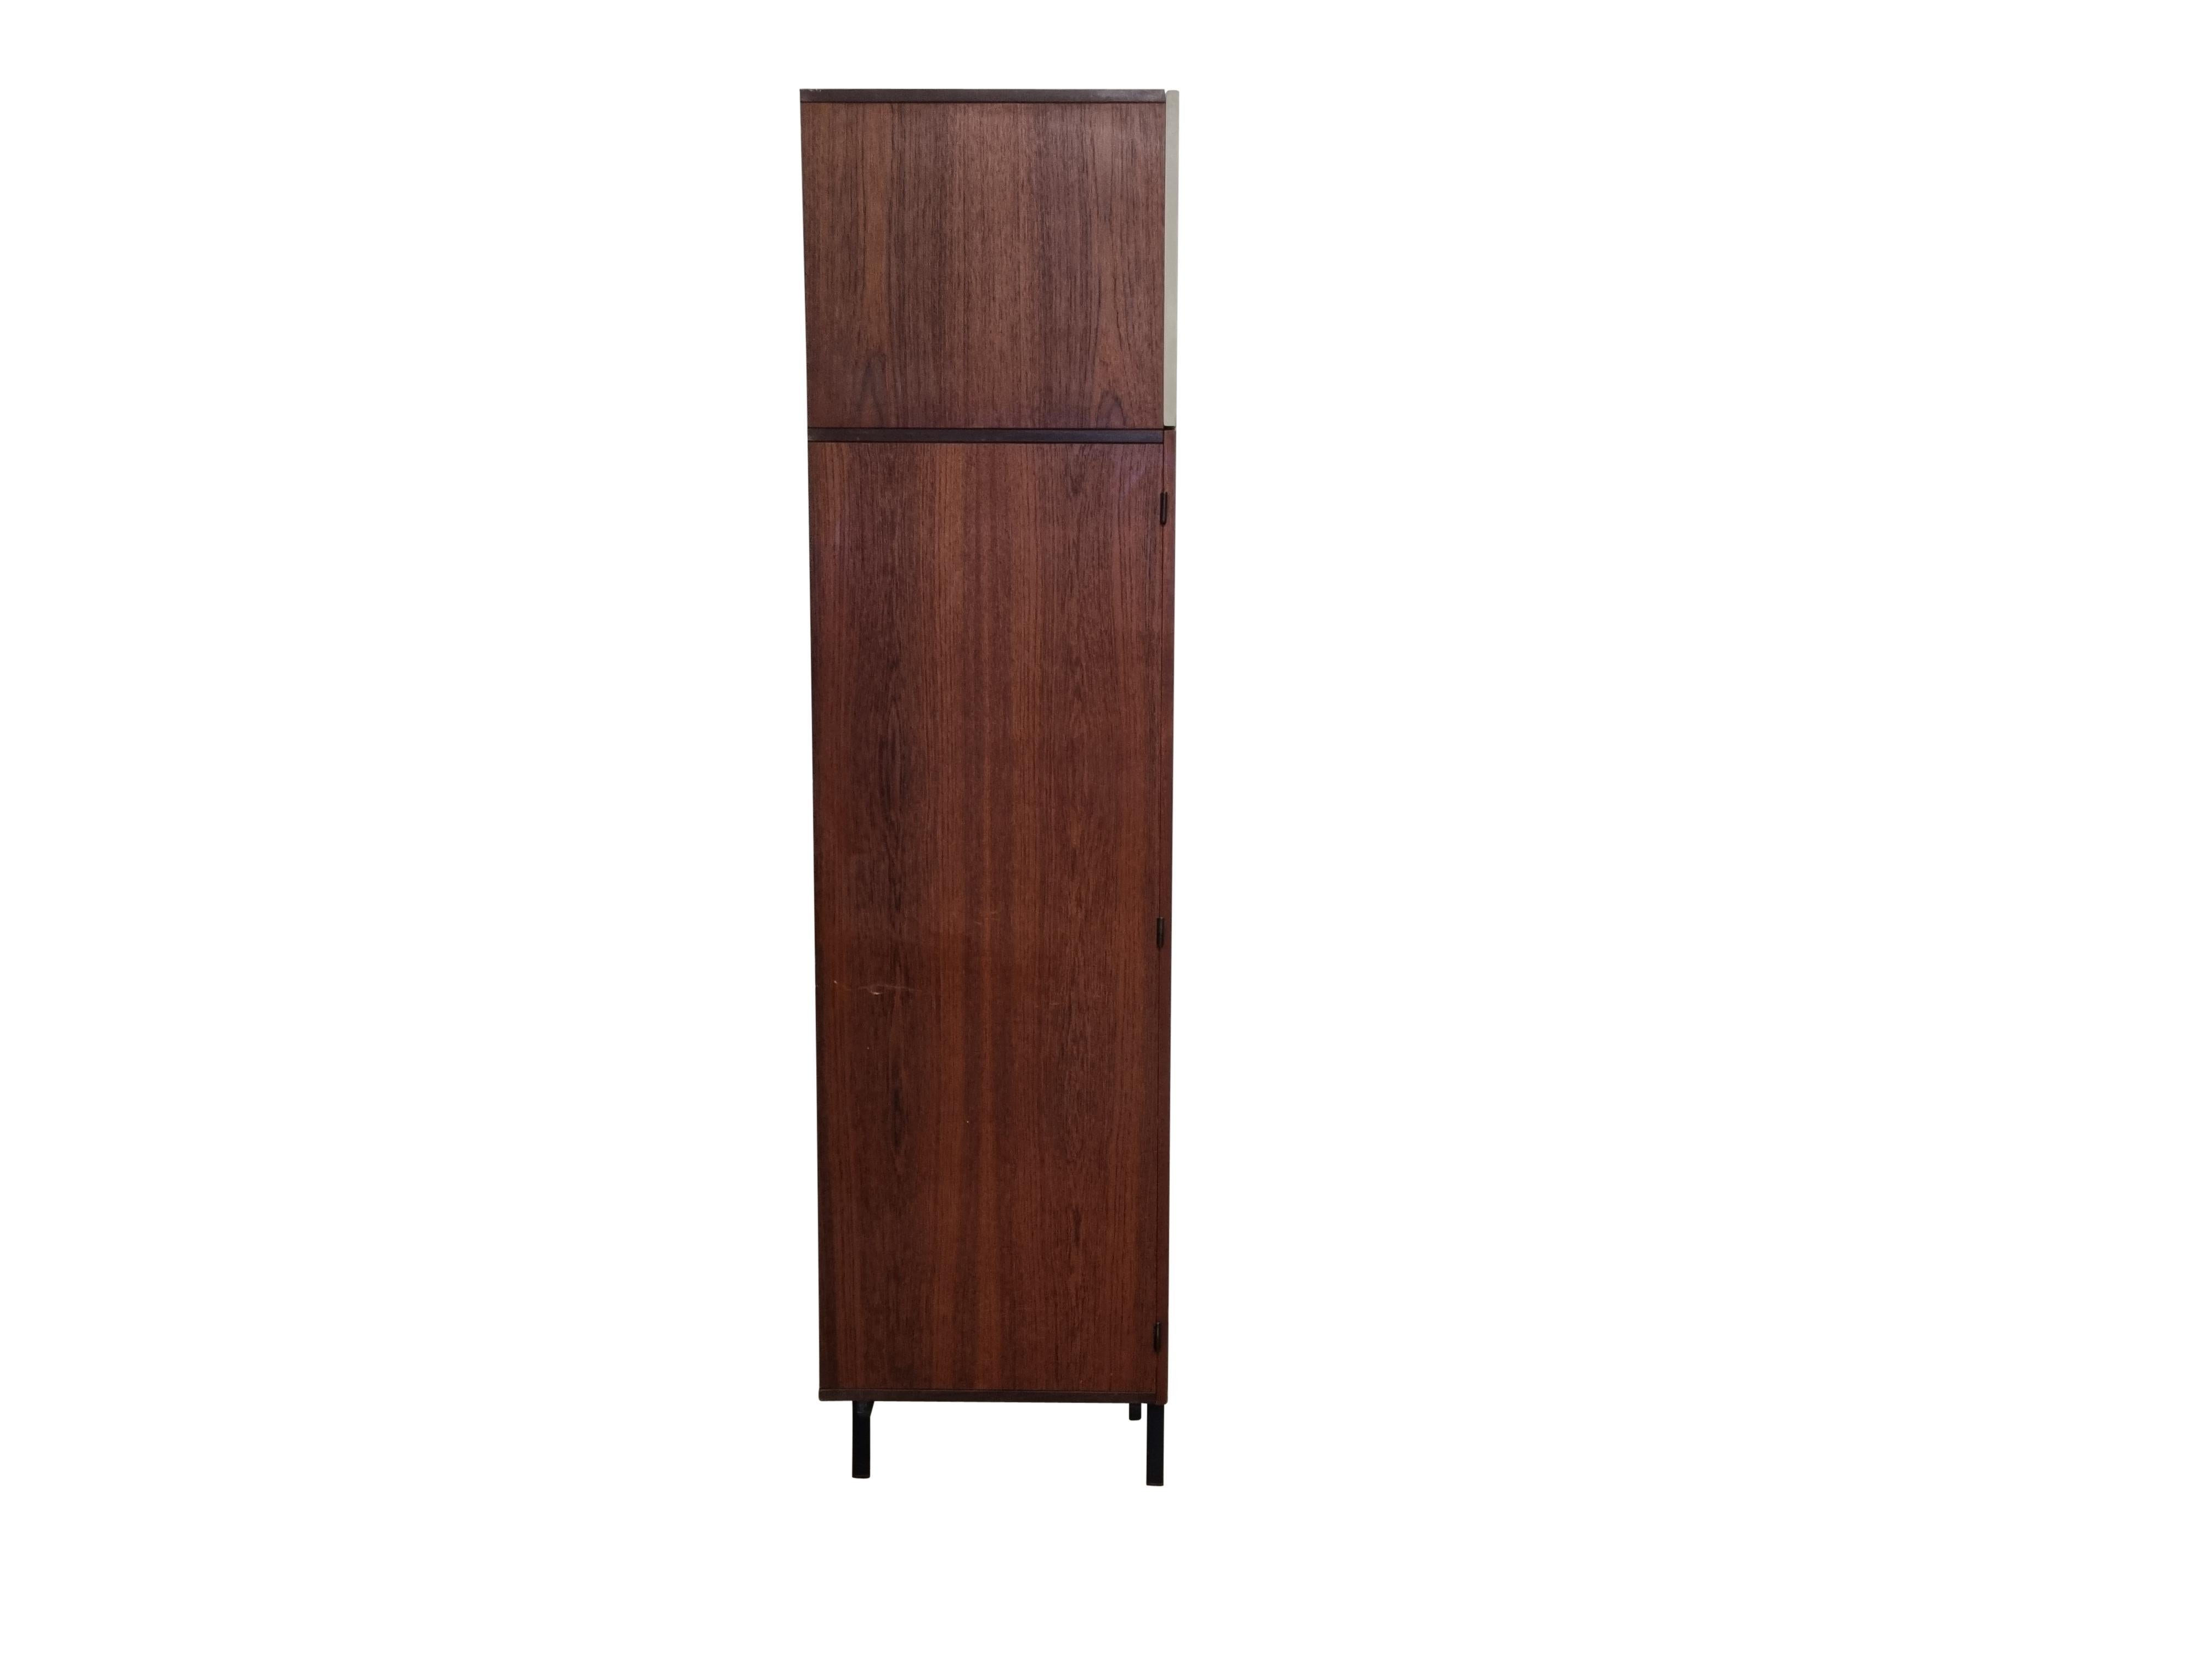 Mid century teak wardrobe designed by Cees Braakman for the Japanese series in 1958 and produced by Pastoe.

The cabinet features 2 doors which can open in two parts, one door has a mirror.

Shelves, coat hanger and two top storage parts with